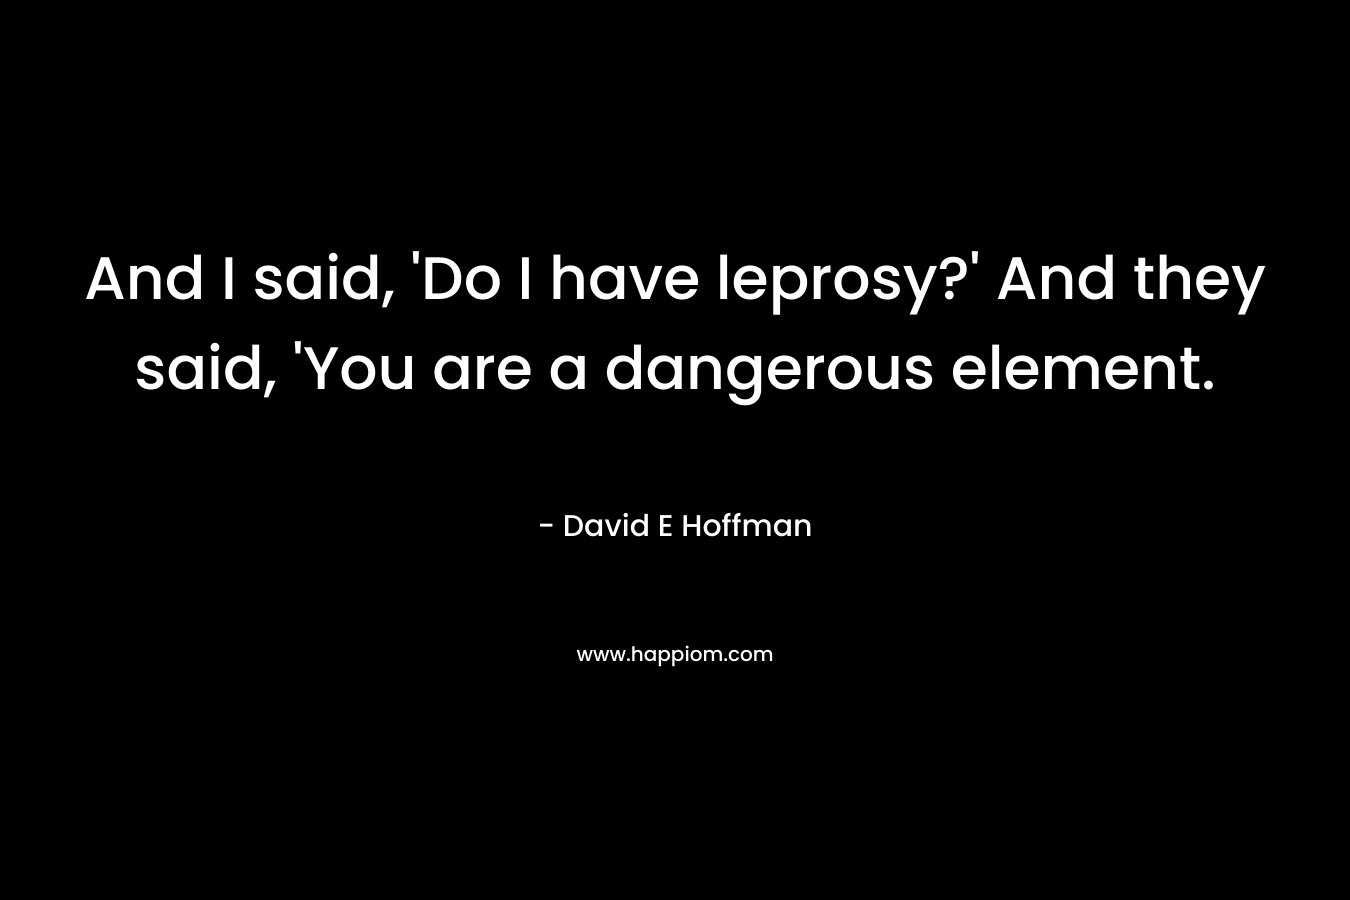 And I said, 'Do I have leprosy?' And they said, 'You are a dangerous element.